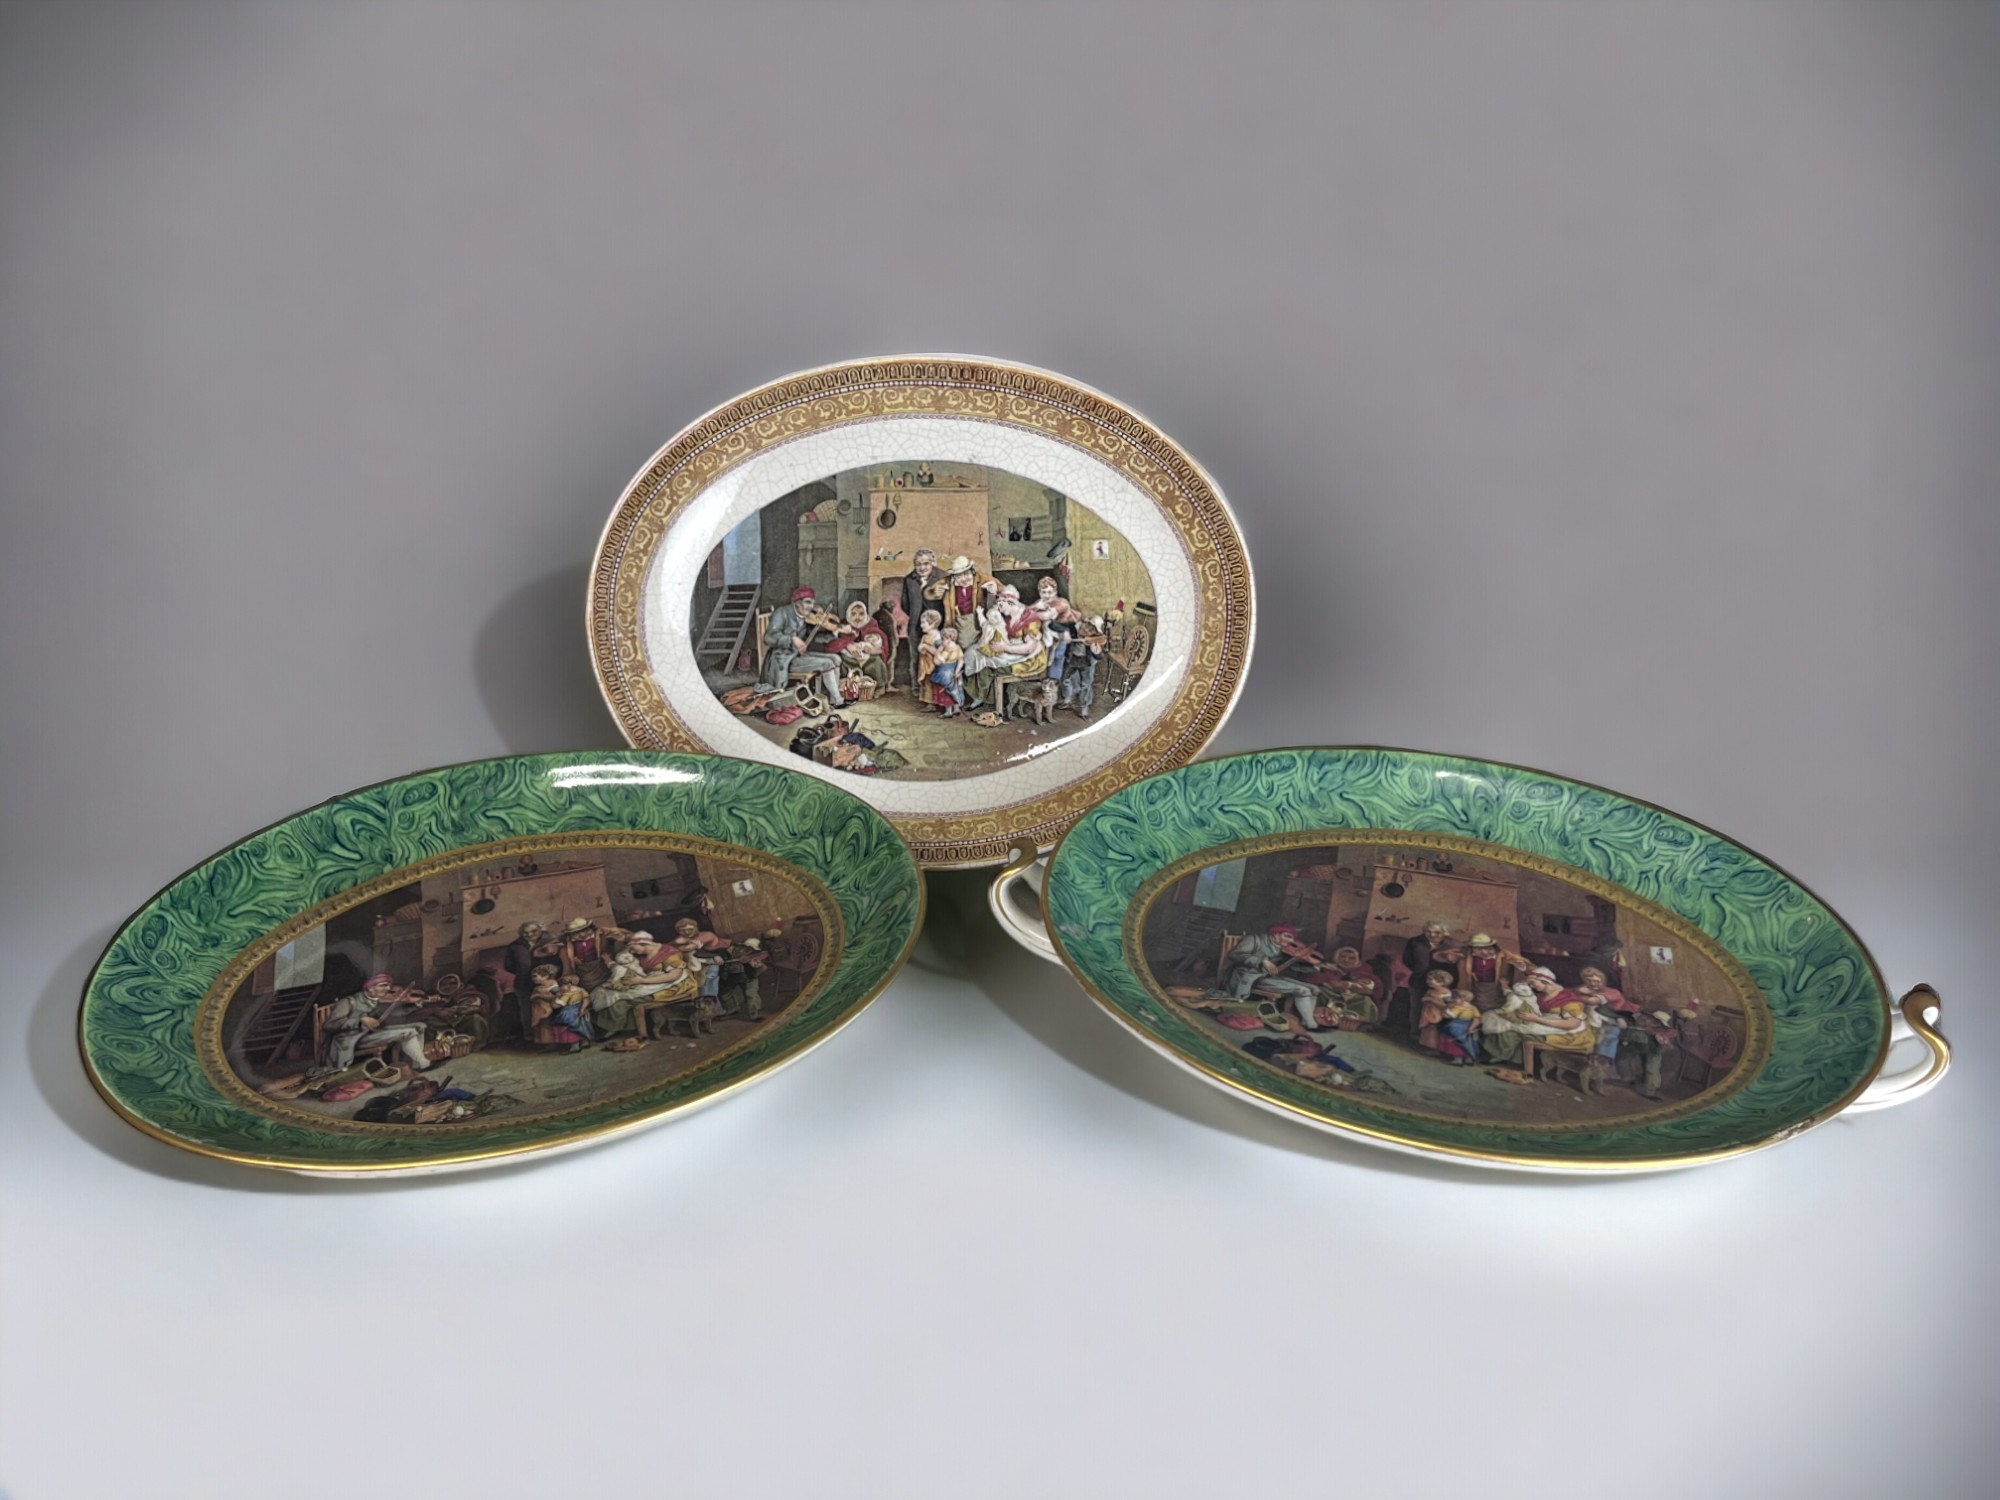 Three 19th century F&R Pratt serving dishes. 'The blind fiddler' pattern, by David Wilkie. With